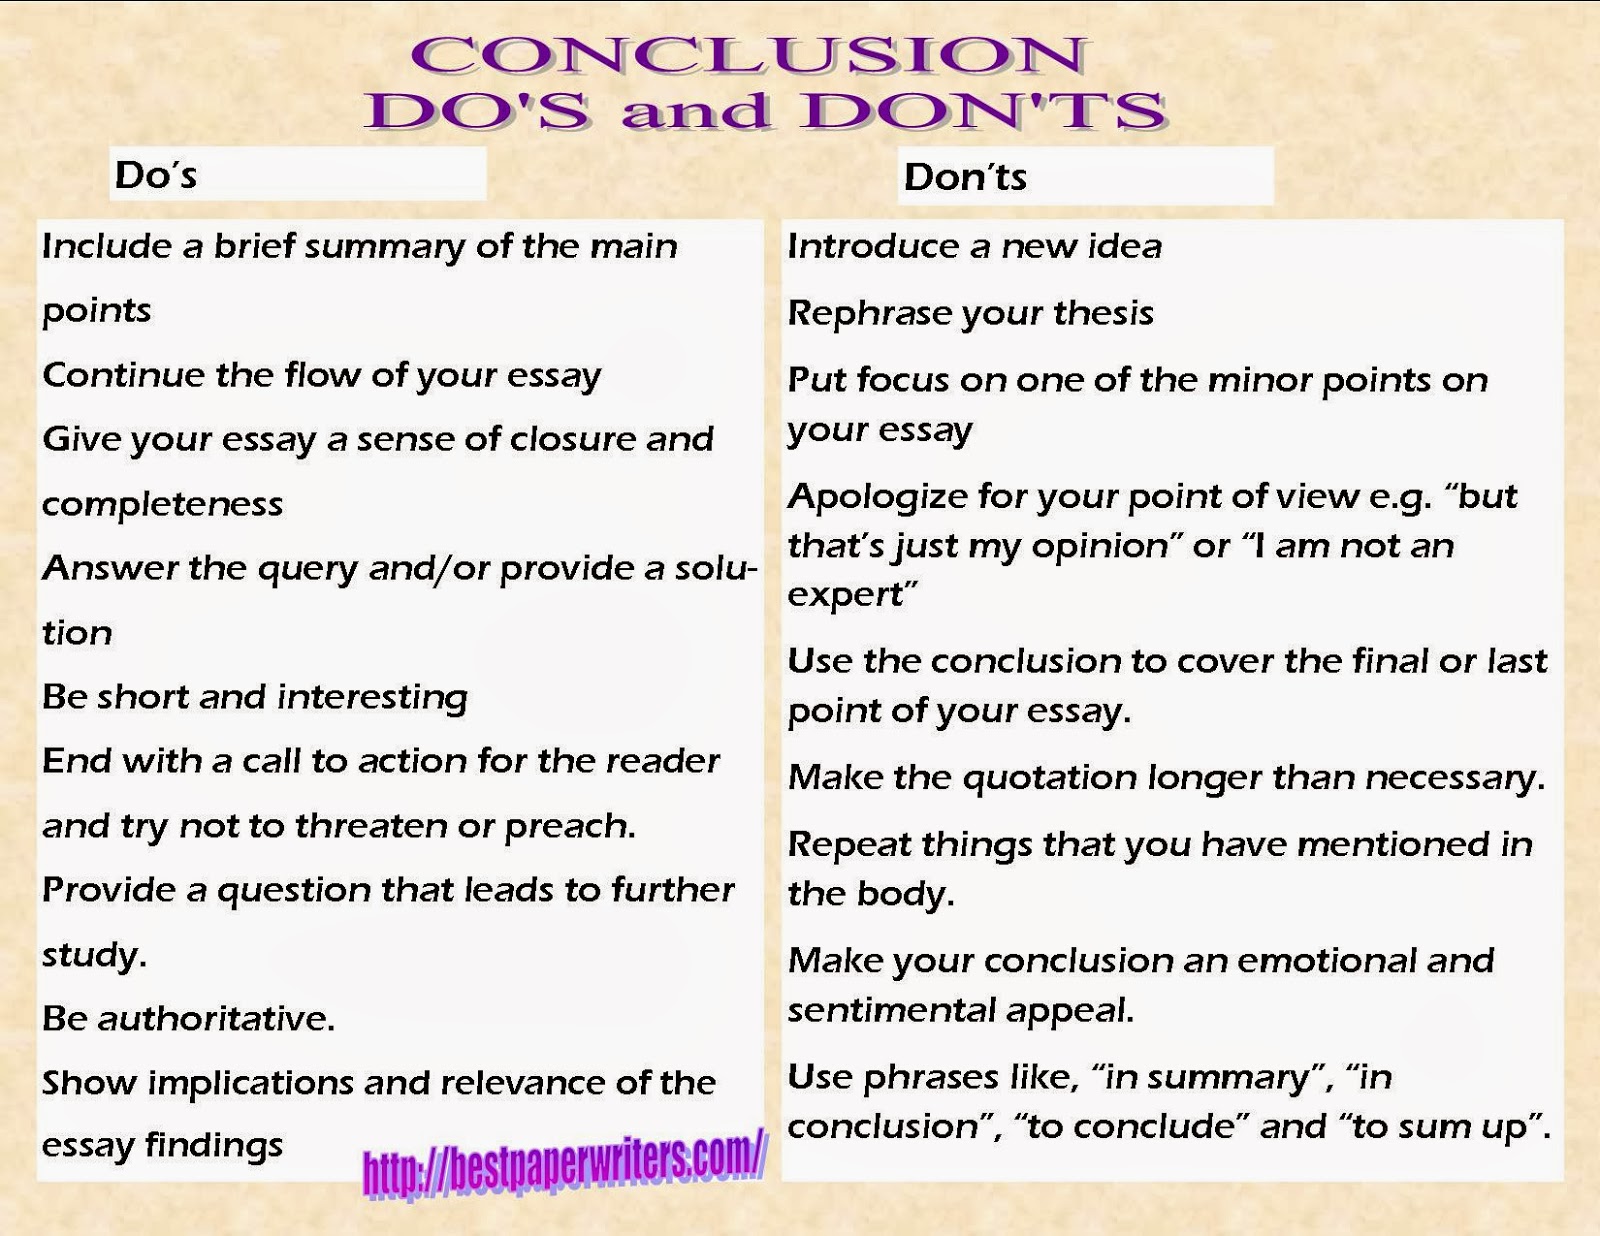 How to write a conclusion dissertation